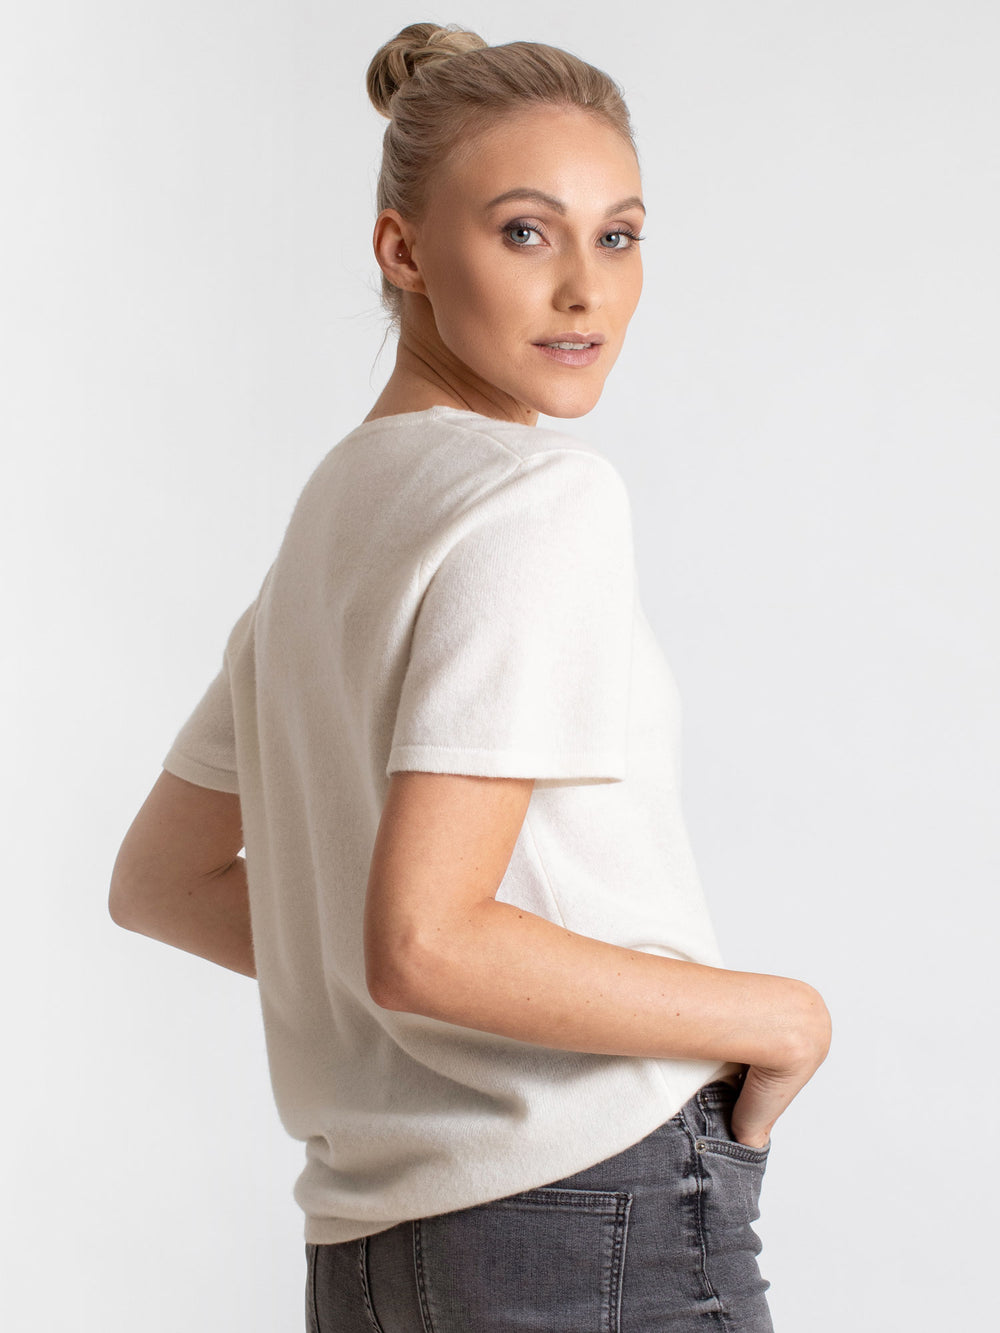 cashmere t-shirt in 100% cashmere by Kashmina